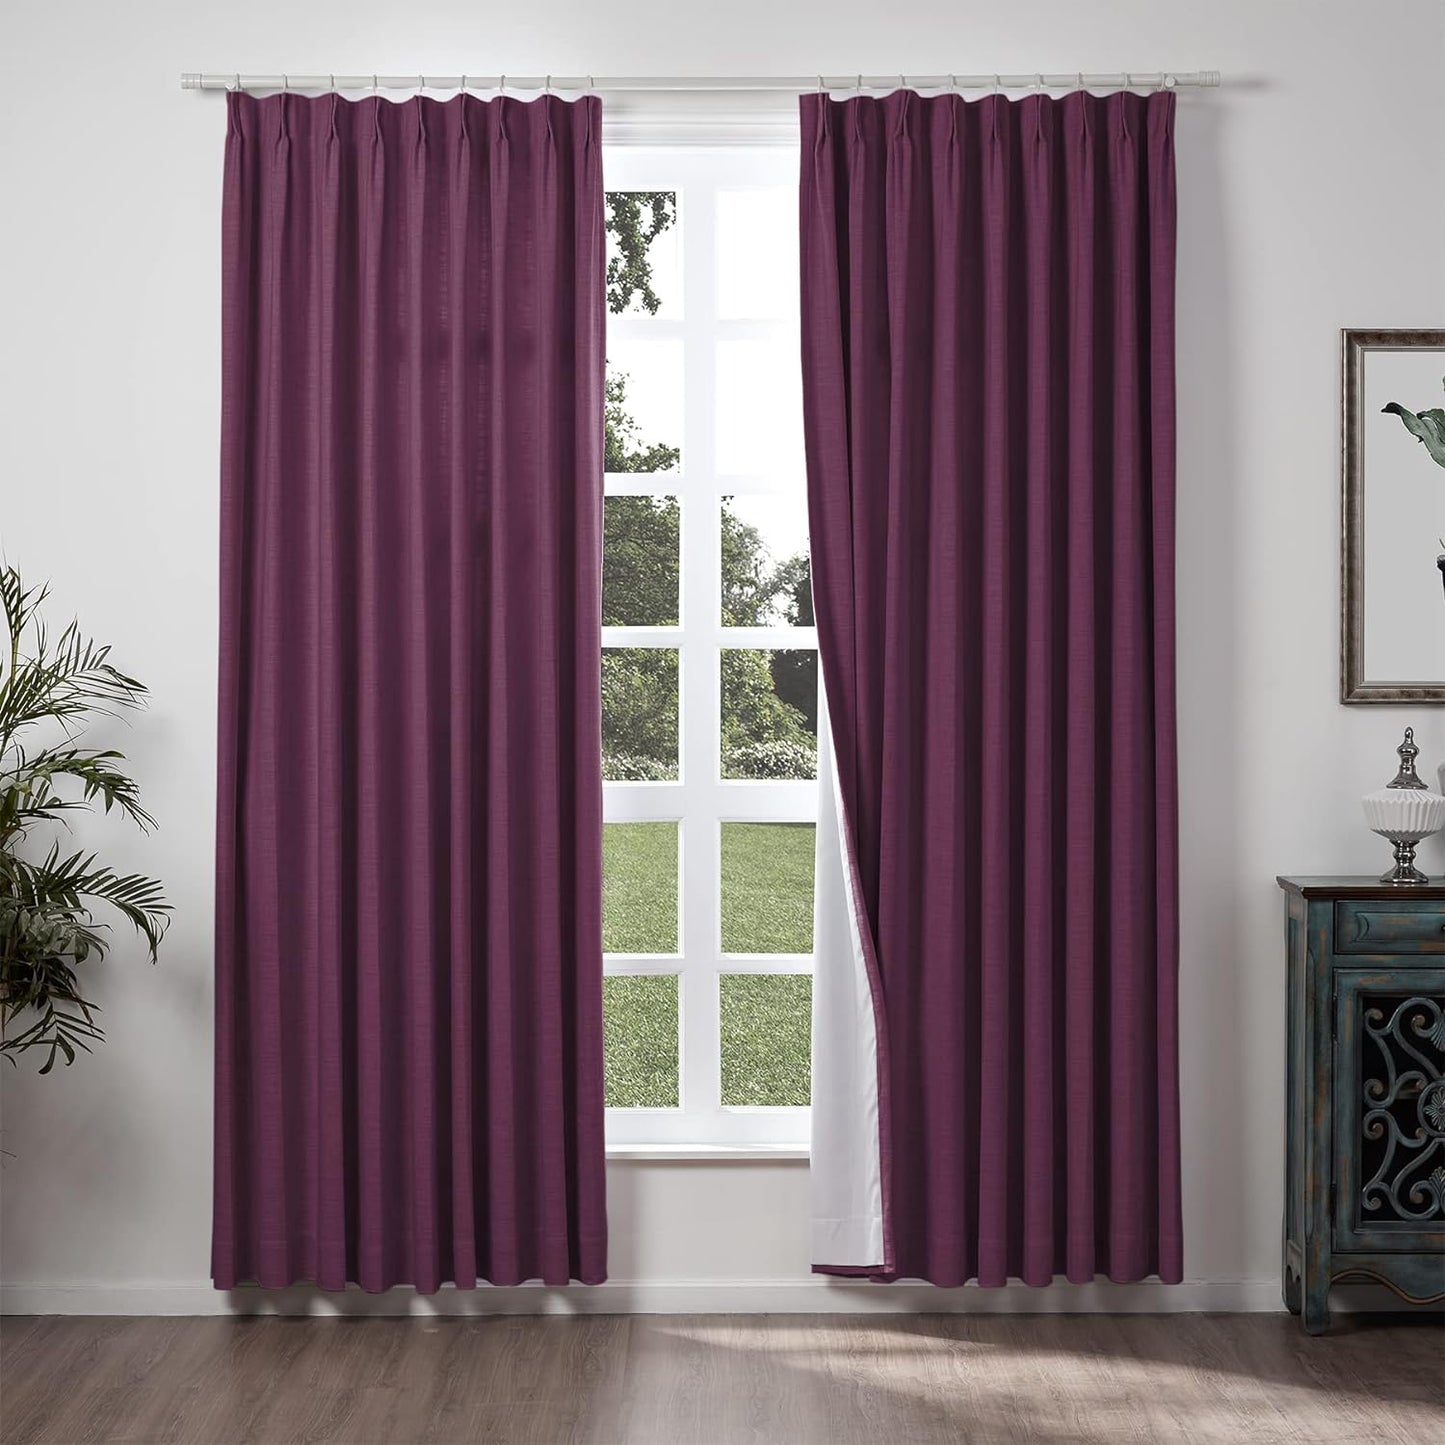 Chadmade 50" W X 63" L Polyester Linen Drape with Blackout Lining Pinch Pleat Curtain for Sliding Door Patio Door Living Room Bedroom, (1 Panel) Sand Beige Tallis Collection  ChadMade Plum (21) 120Wx96L 